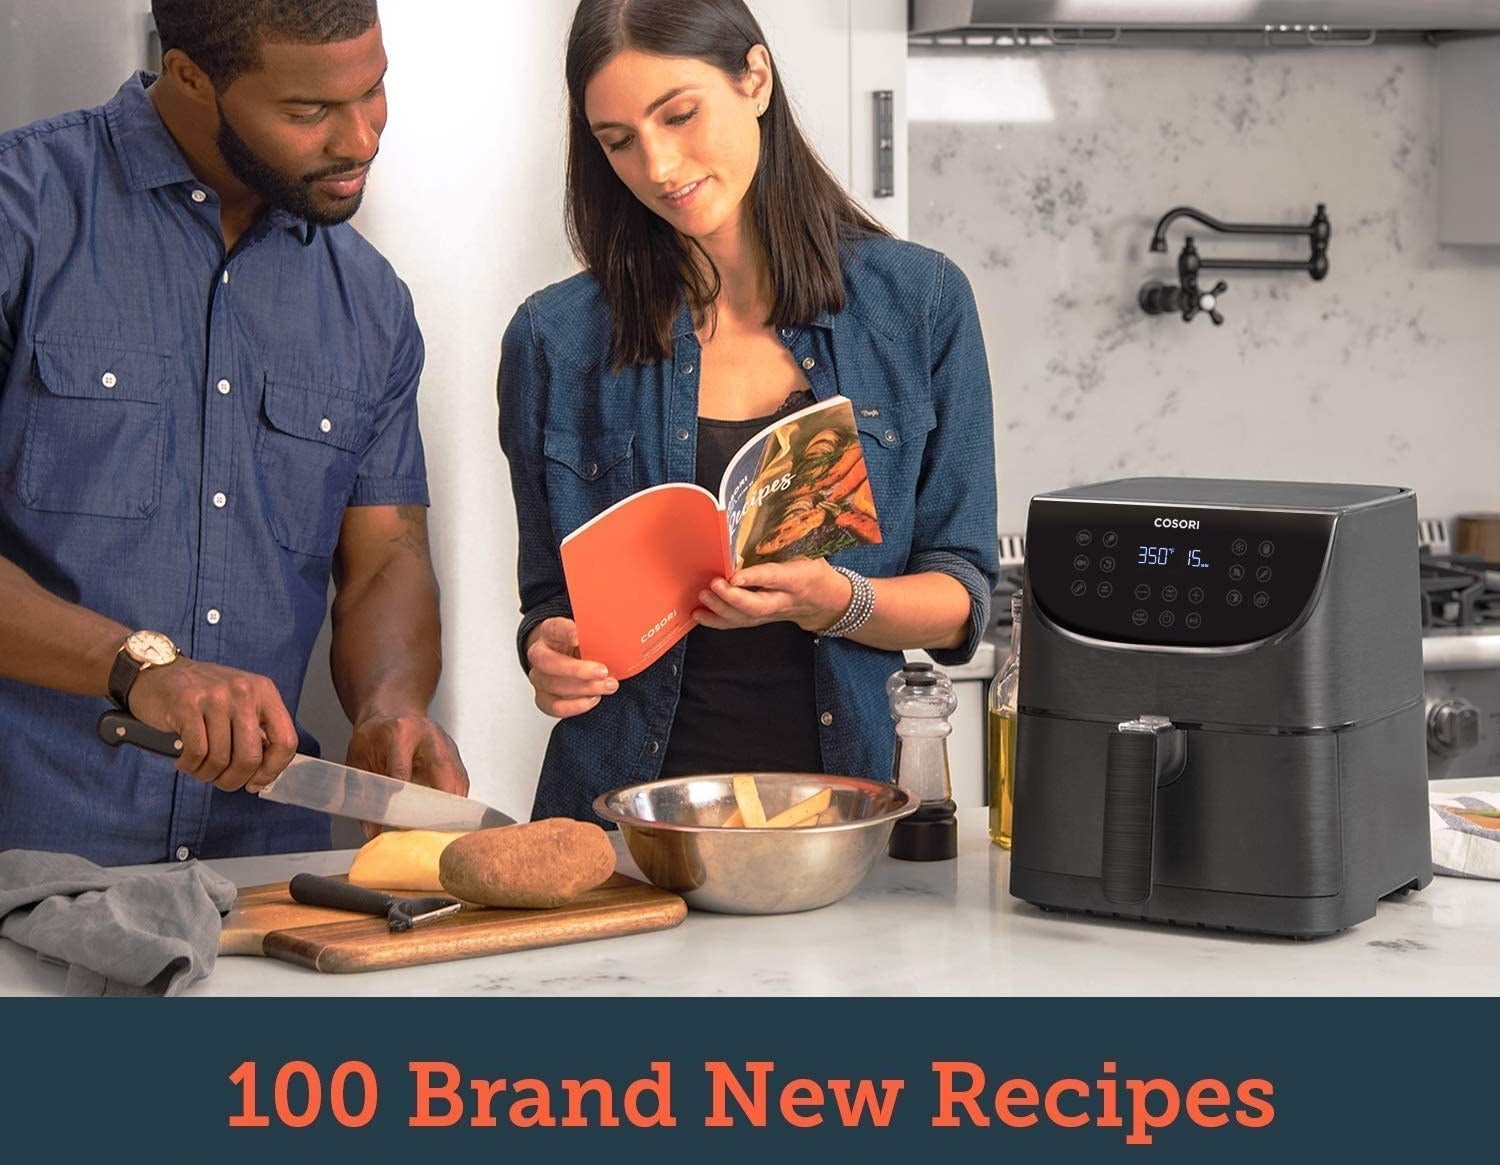 Two people cooking next to the air fryer